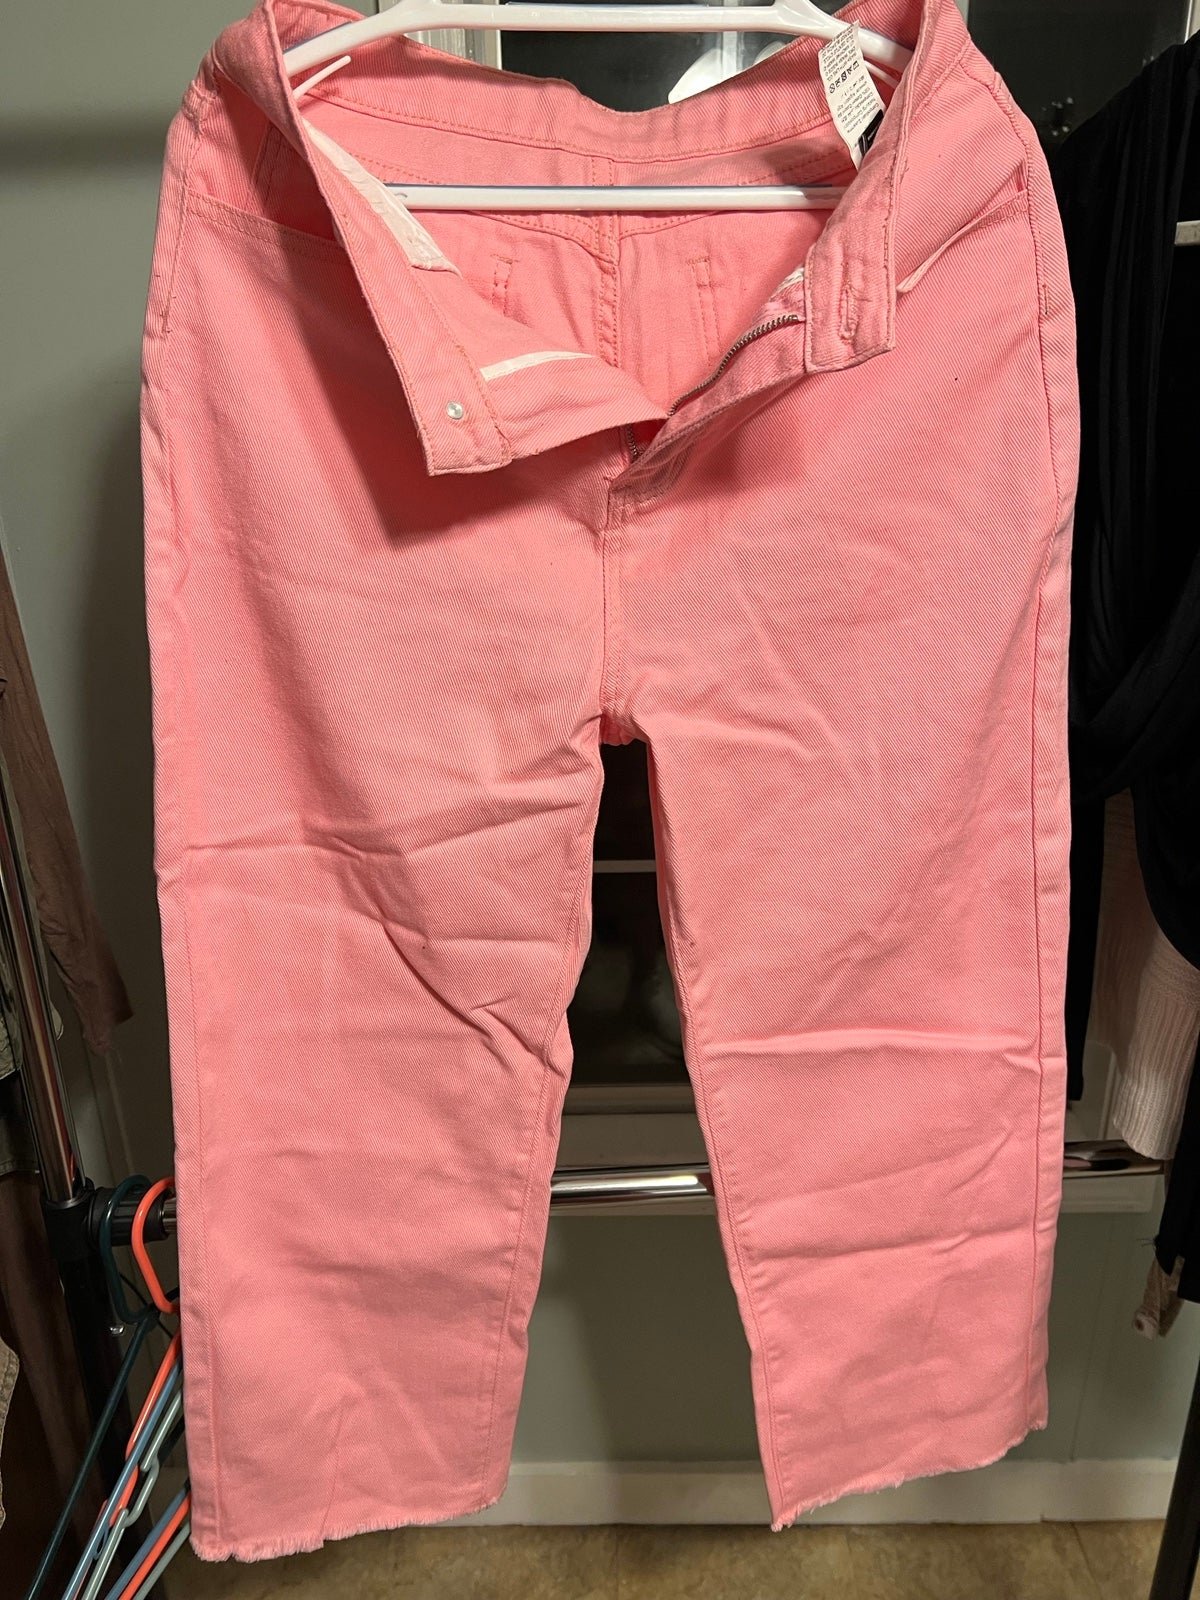 cheapest place to buy  SHEIN pink cropped jeans HGe92lv